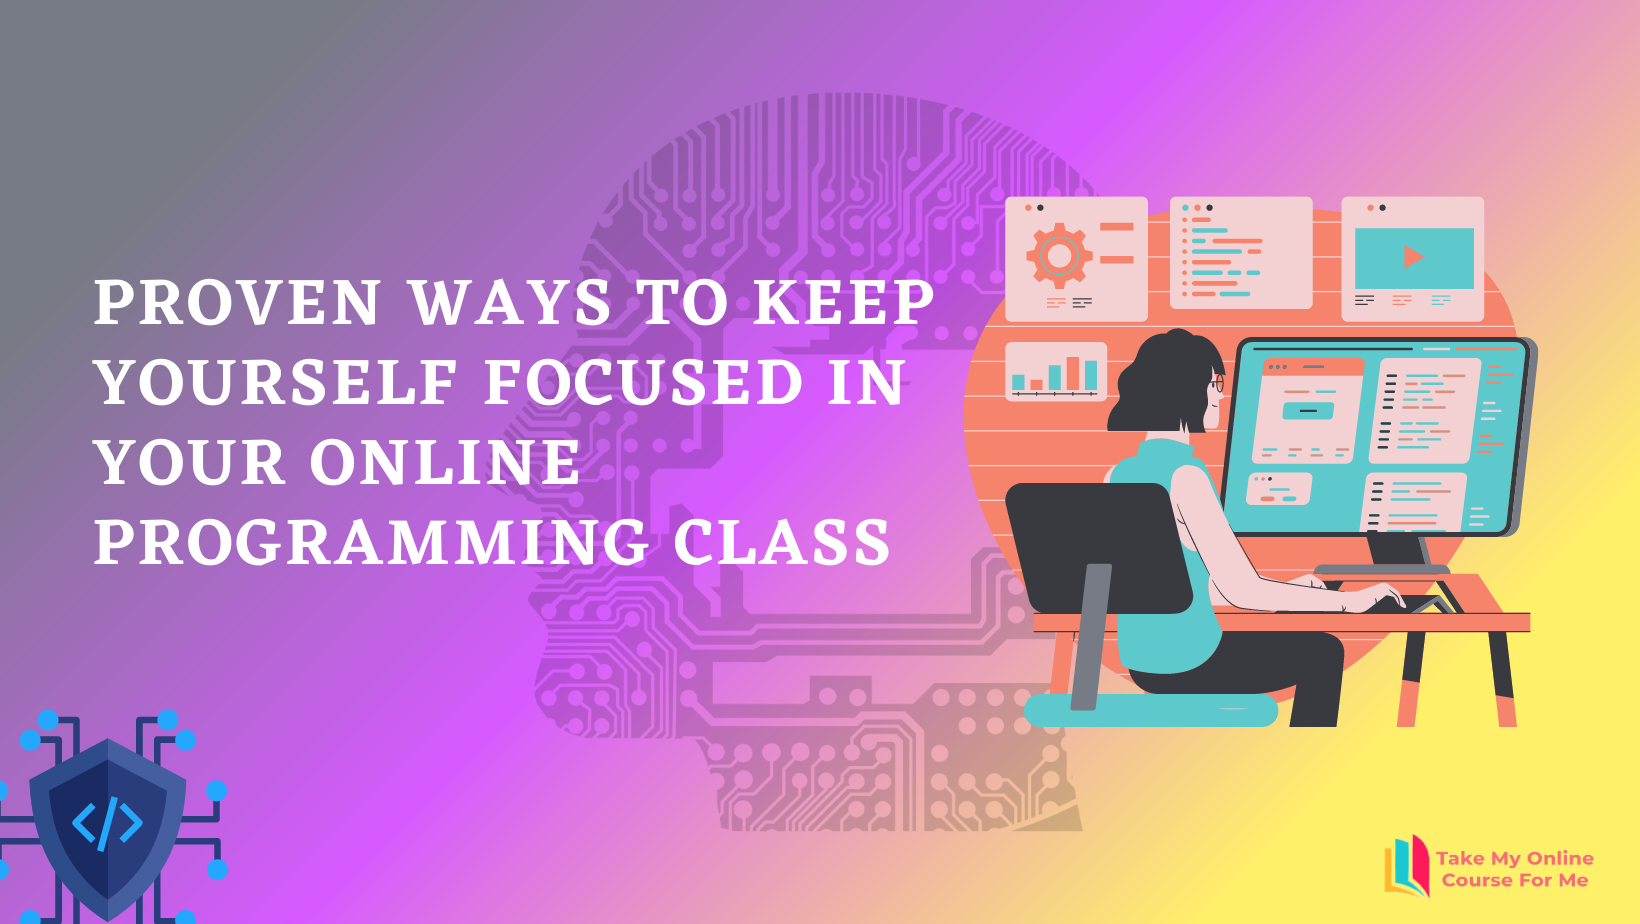 Proven ways to keep yourself focused in your online programming class